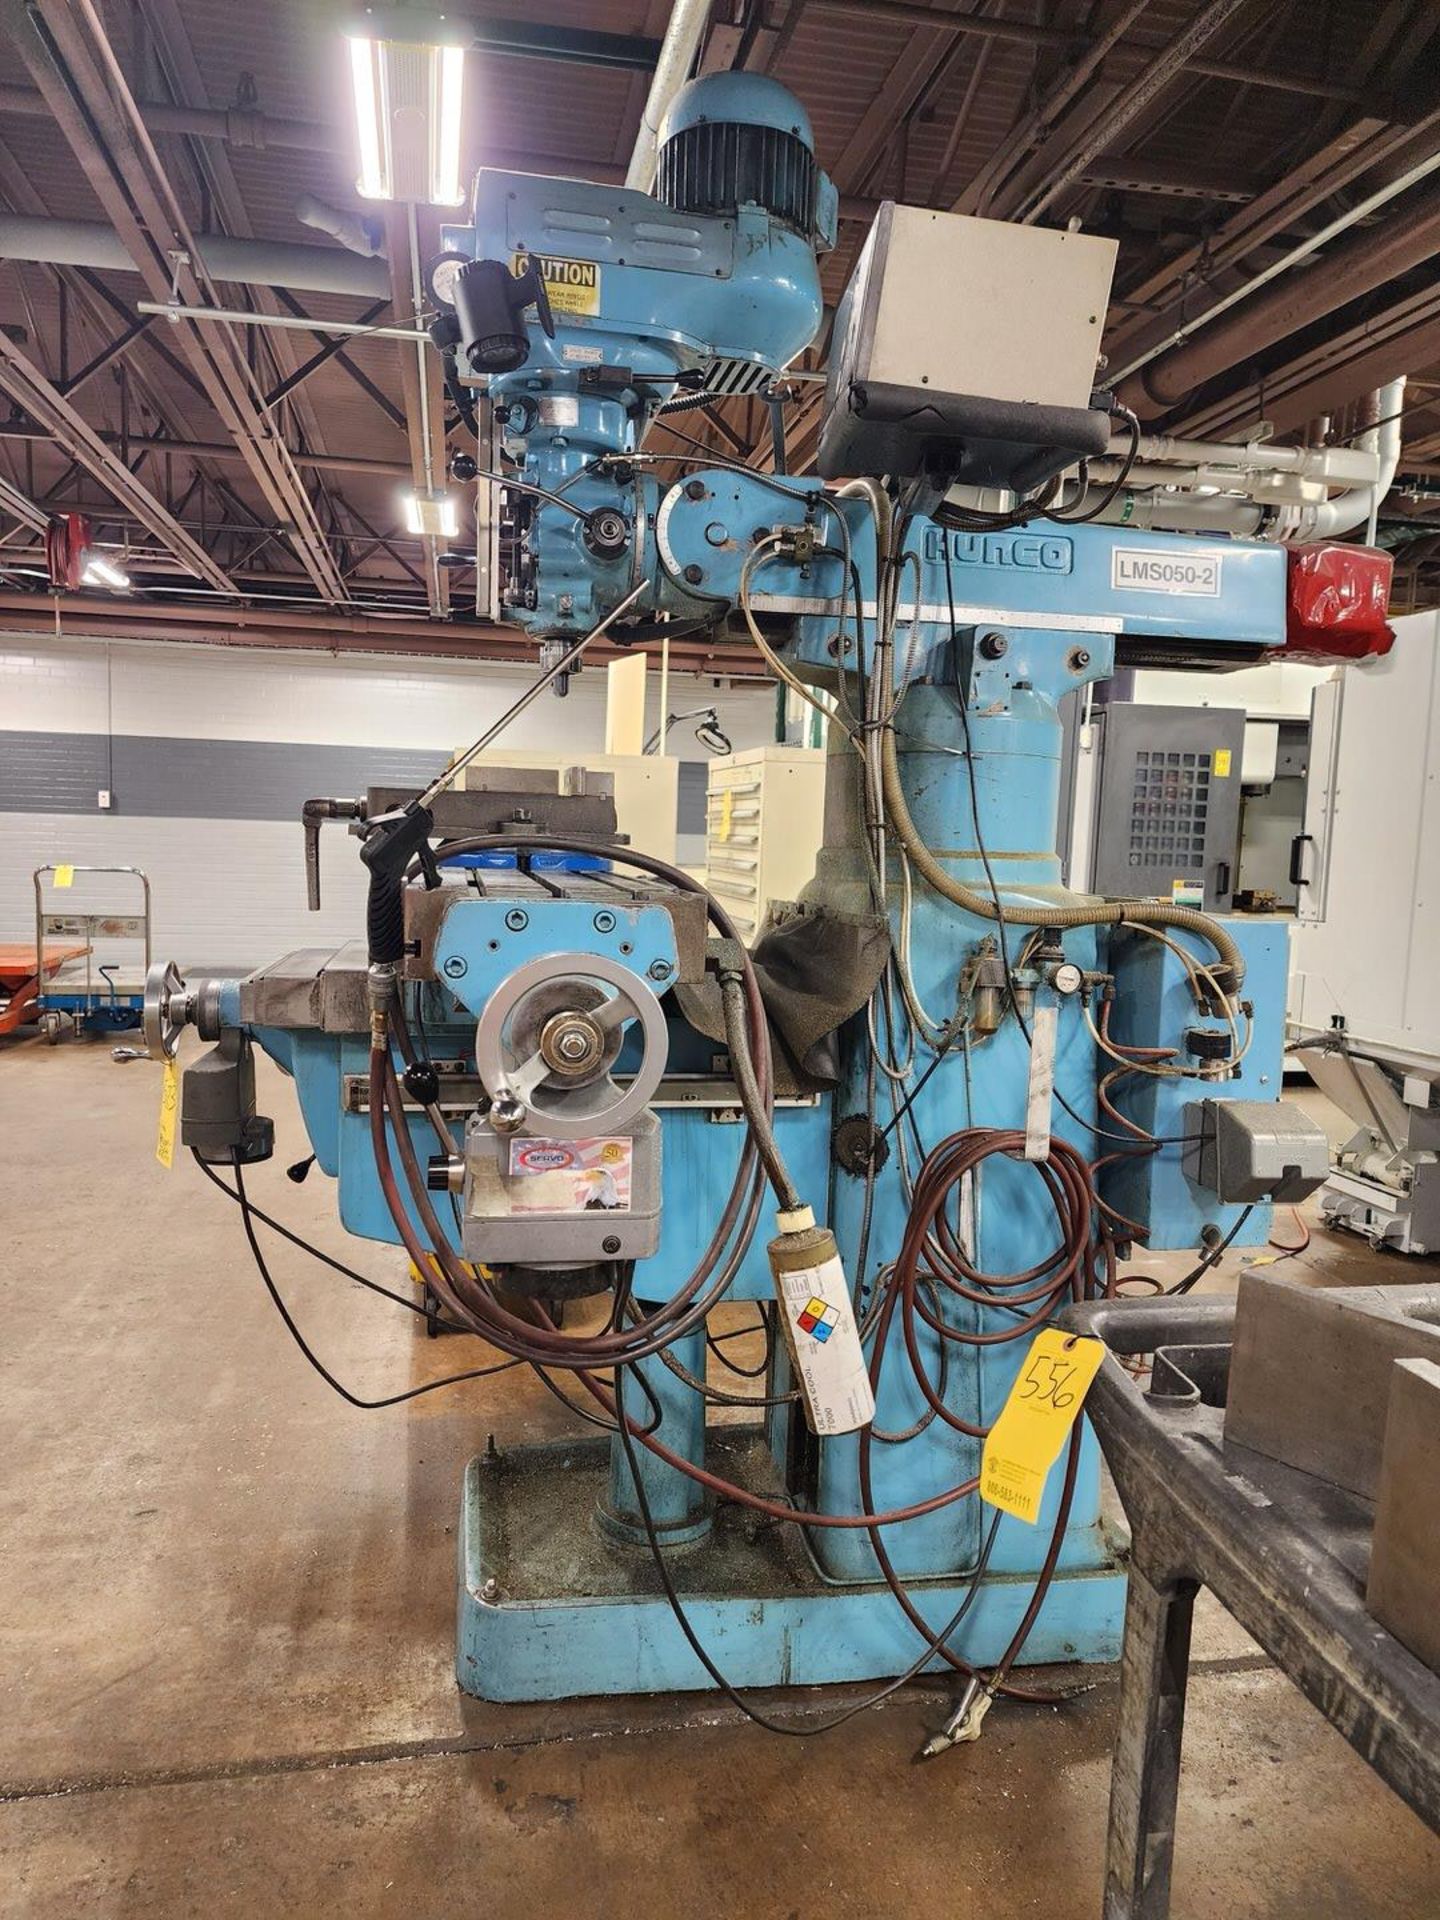 Hurco LMS050-2 Milling Machine W/ Sony Controller - Image 13 of 15